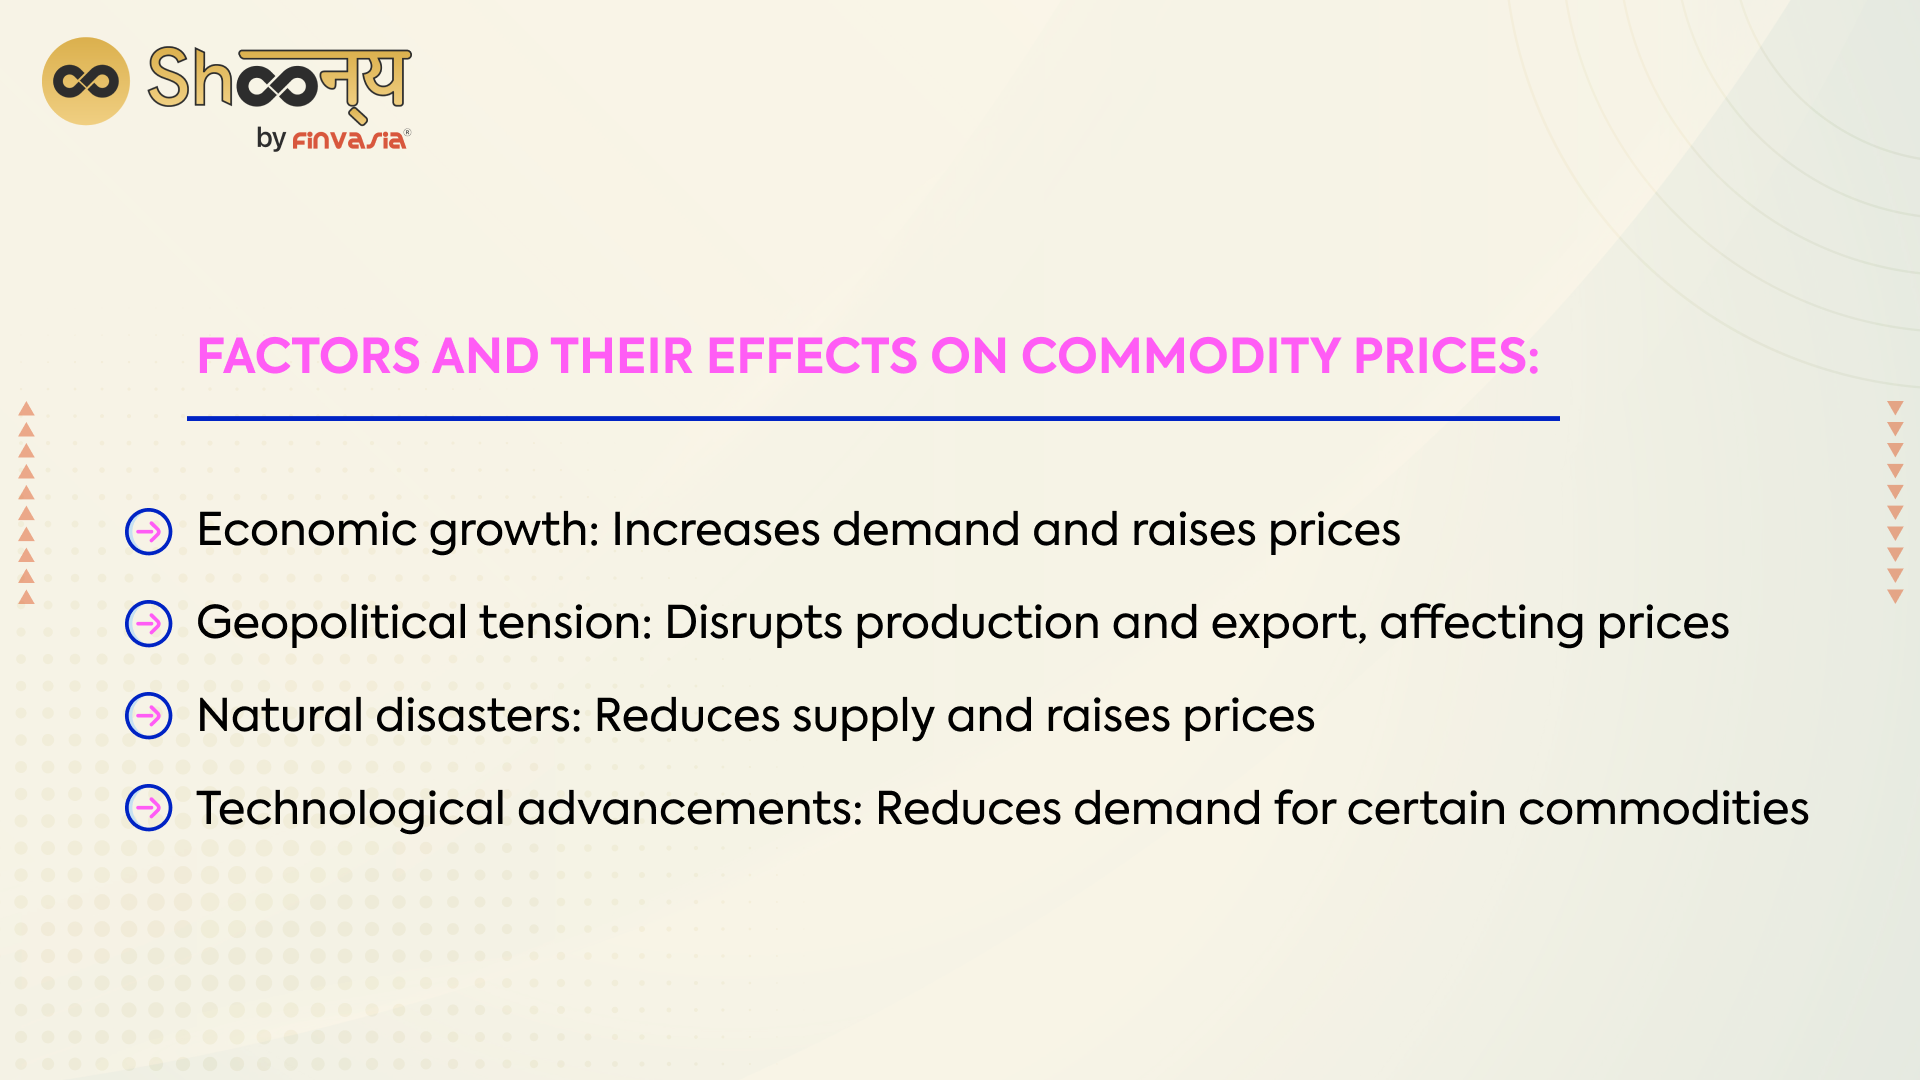 Factors and their Effects on Commodity Prices